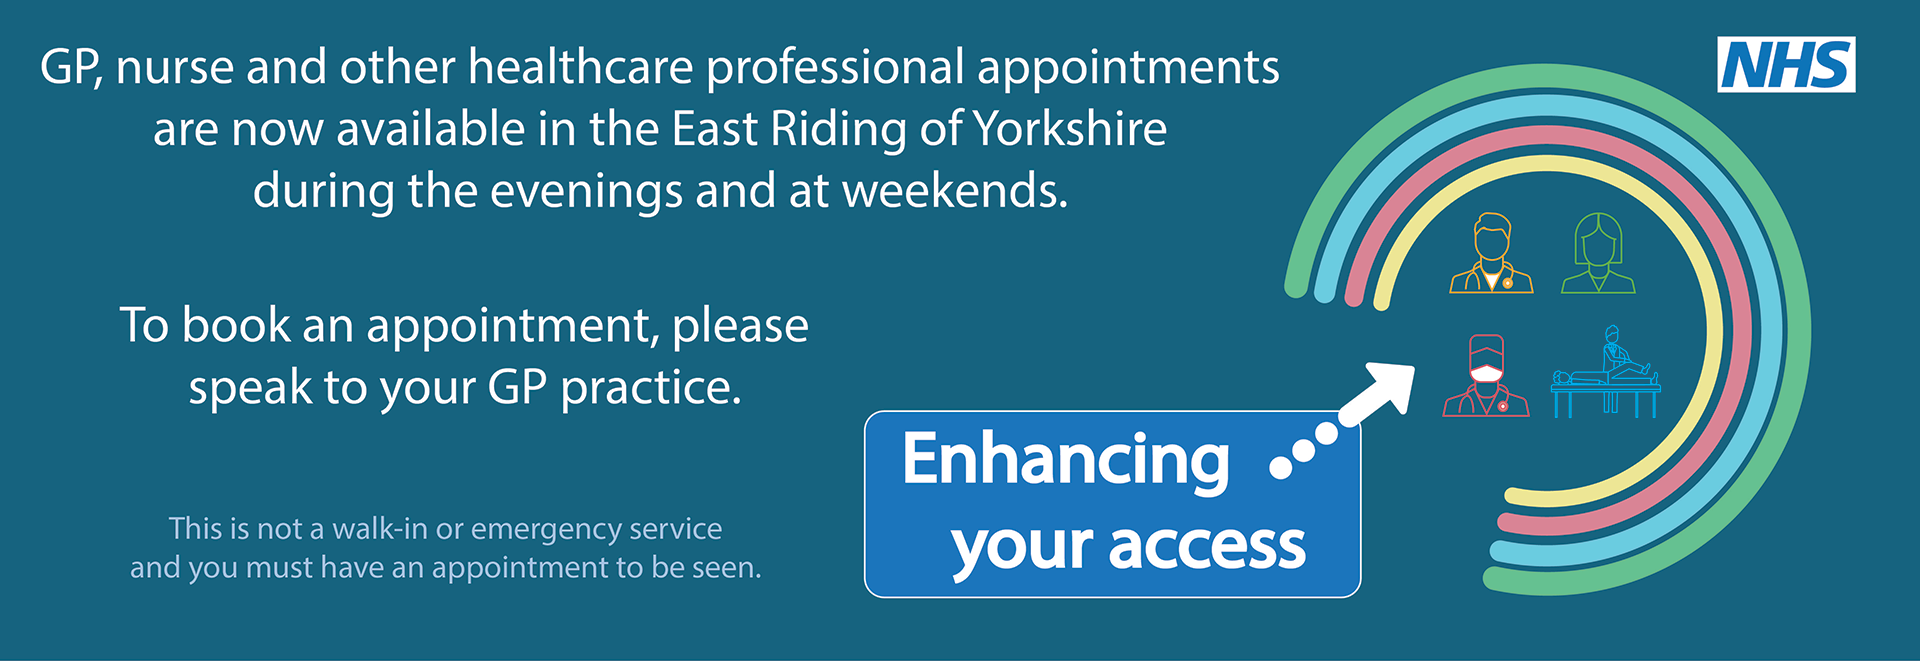 Appointments are now available during the evenings and weekends. Click here for more information.